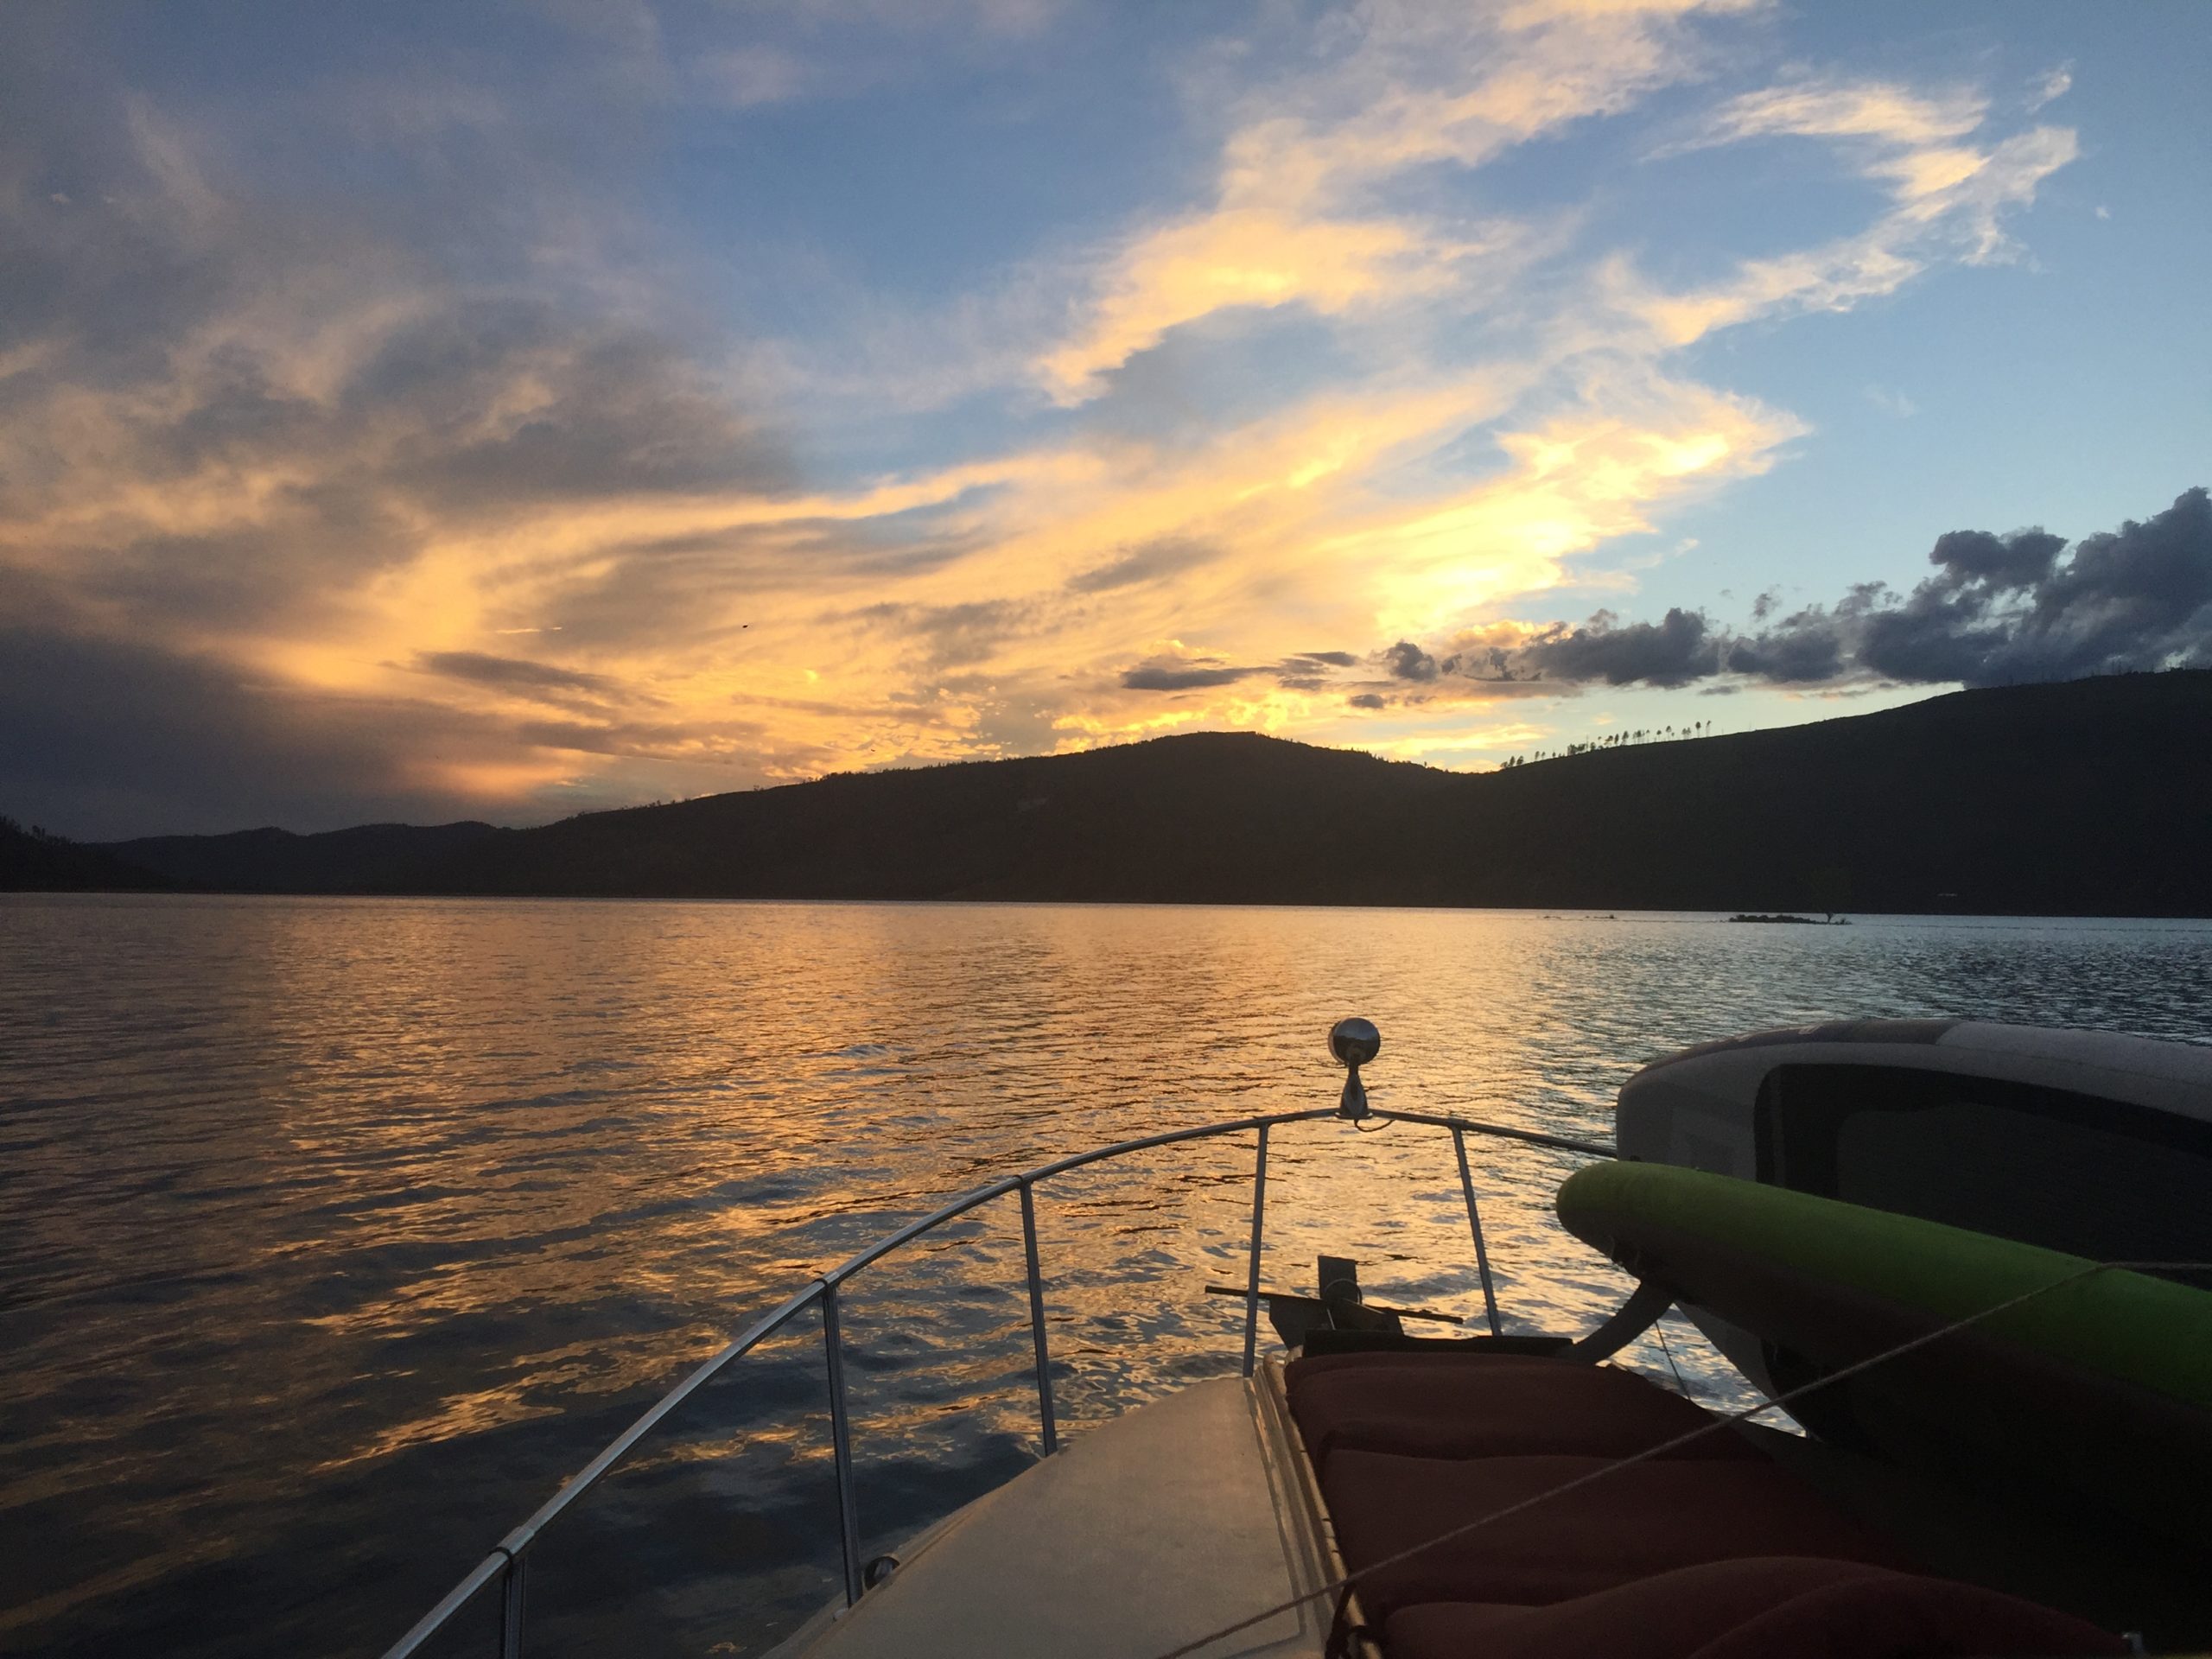 charter vallecito sunset tour boat views on vallecito lake